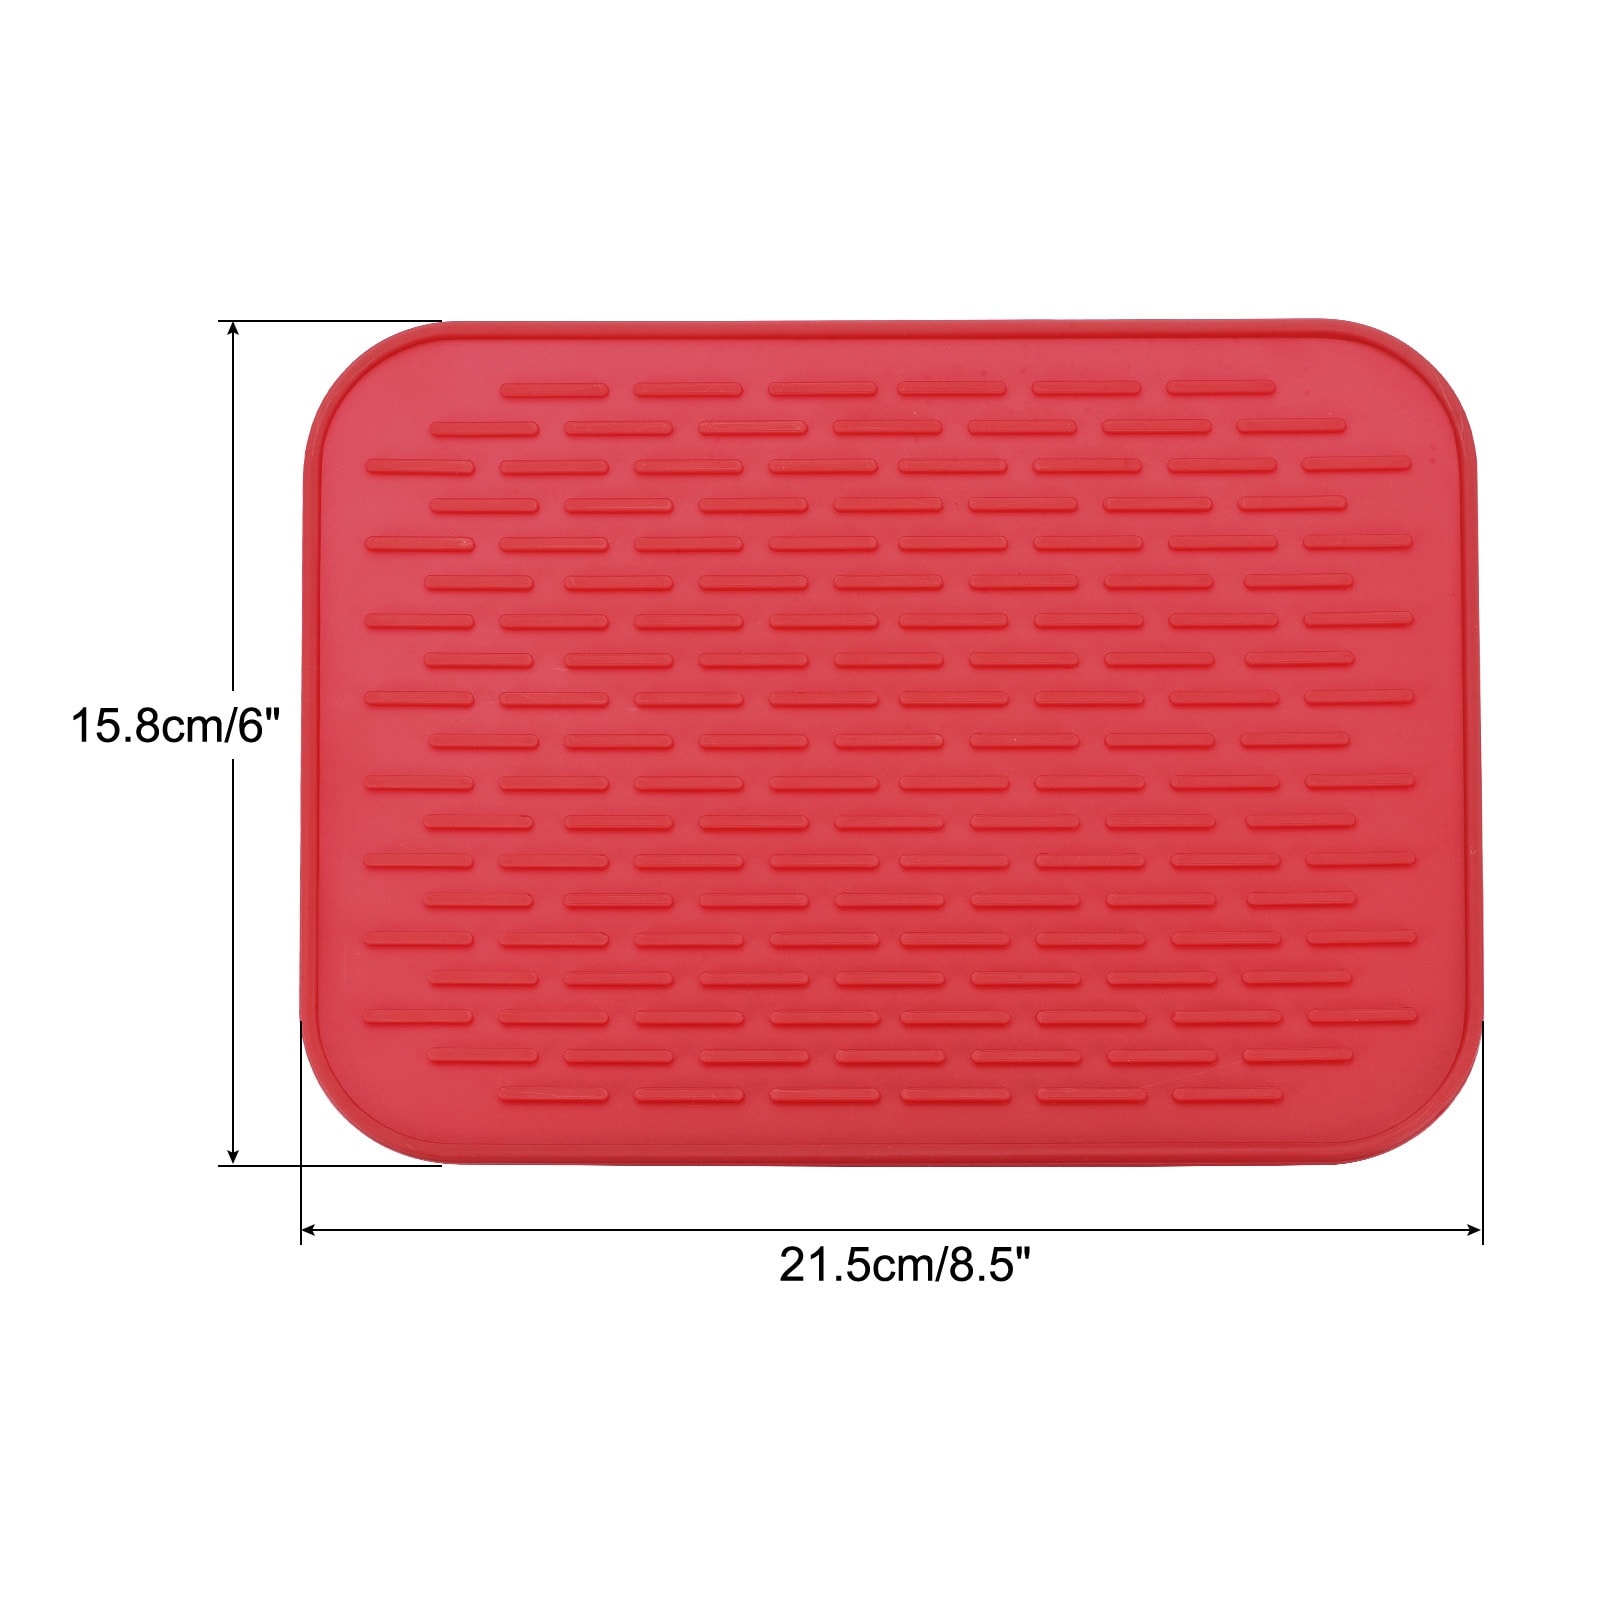 https://ak1.ostkcdn.com/images/products/is/images/direct/2d128f3c437a2c80c12d03c97a0cbb9d99952484/Silicone-Dish-Drying-Mat%2C-Under-Sink-Drain-Pad-for-Kitchen-Counter.jpg